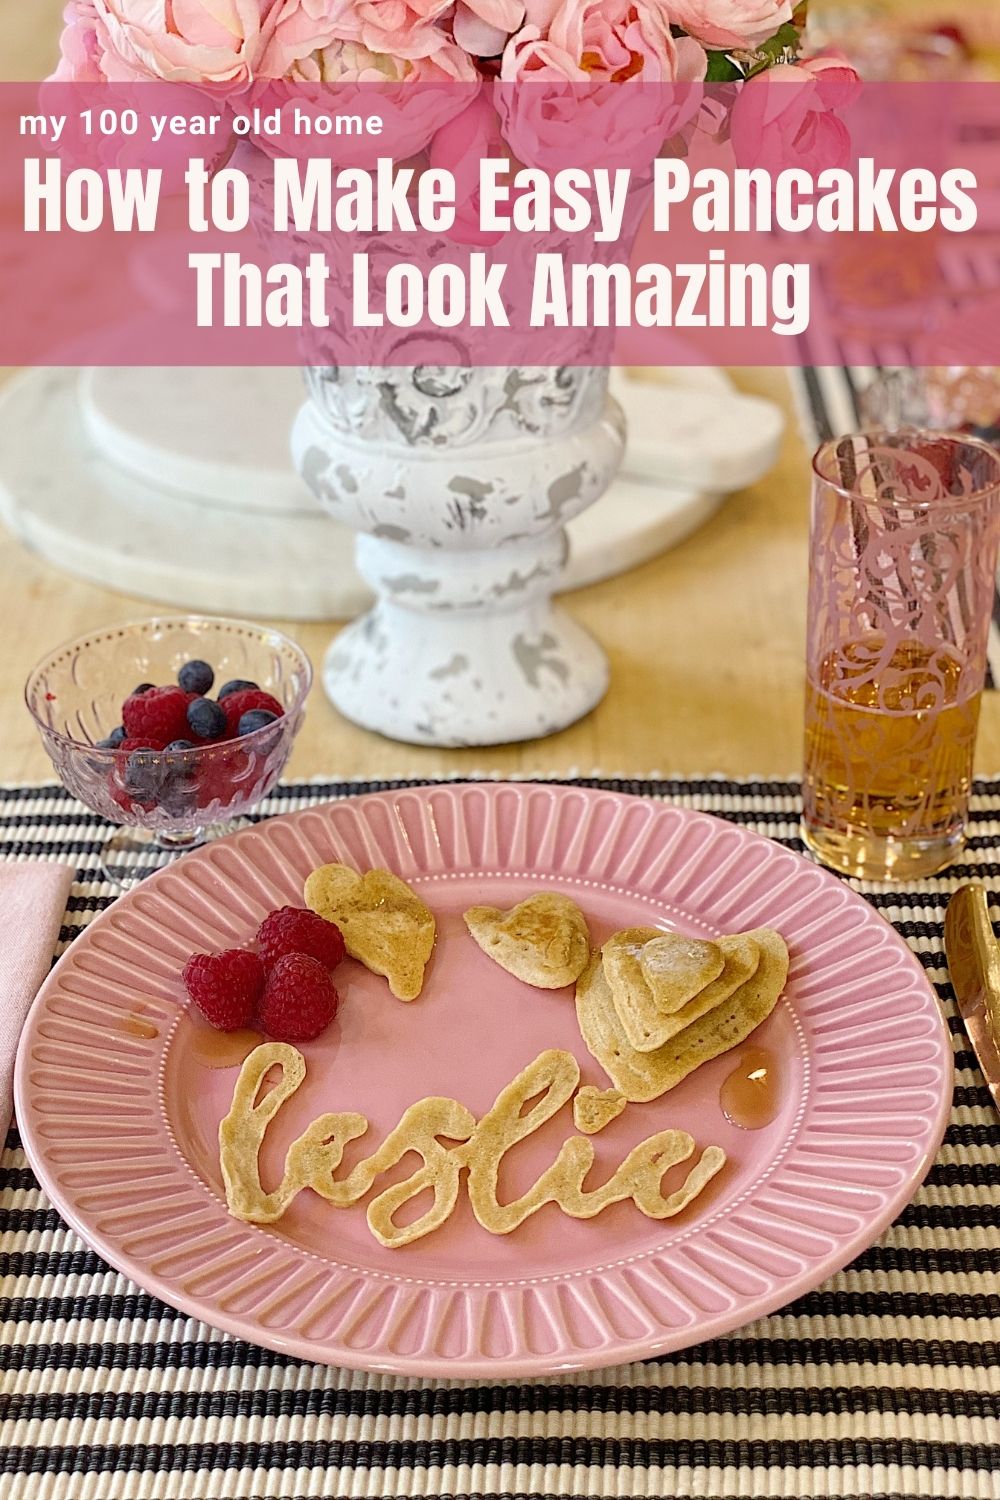 I am hosting my sisters for breakfast and I wanted a pancake breakfast featuring their names. I can't wait to share how I made these easy pancakes!